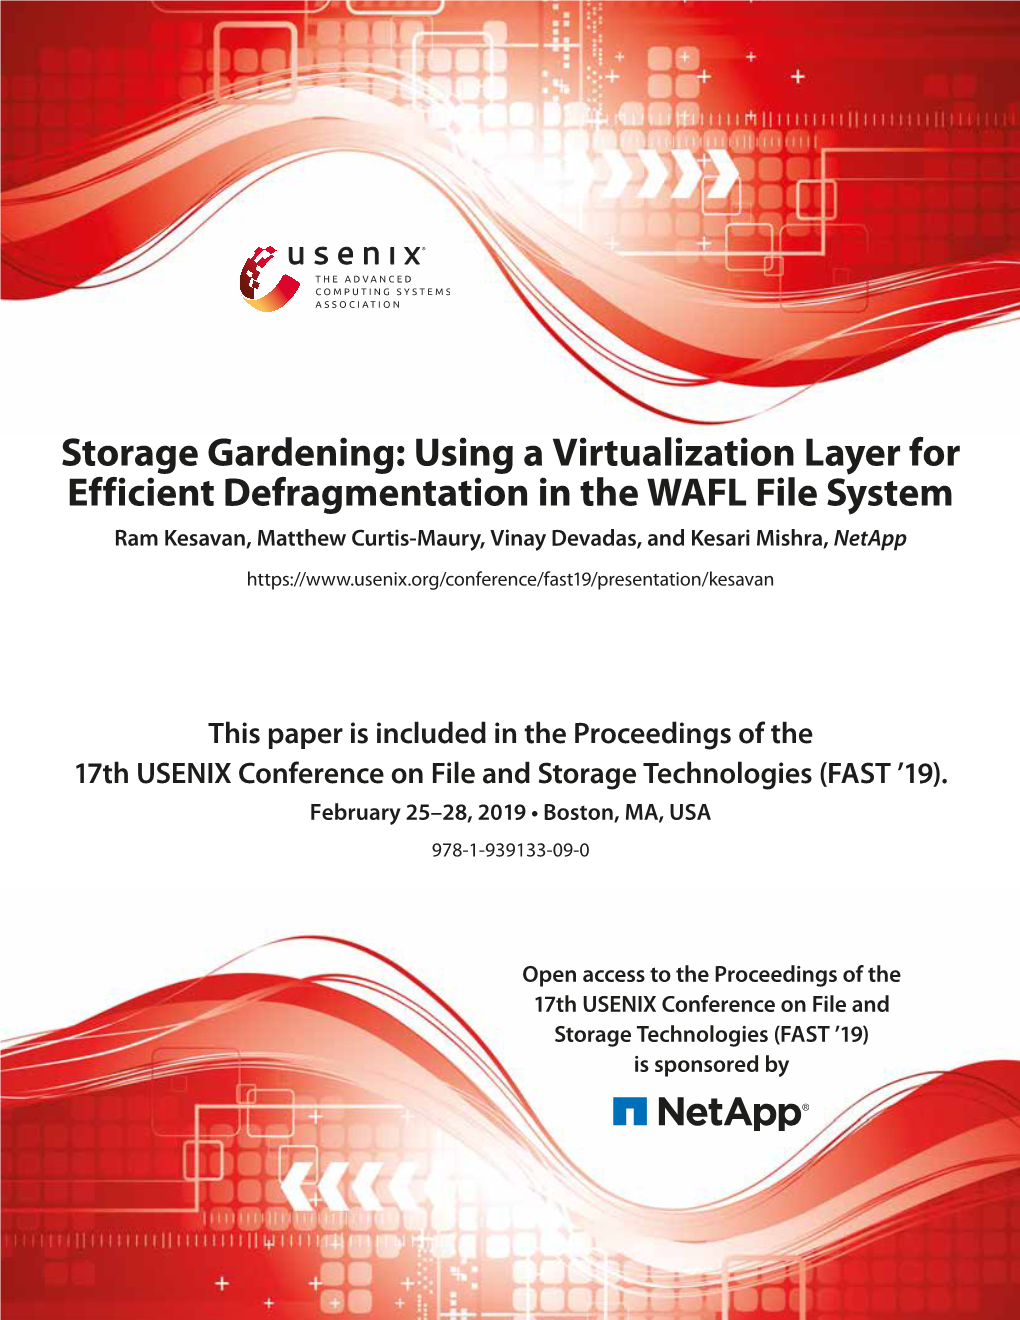 Storage Gardening: Using a Virtualization Layer for Efficient Defragmentation in the WAFL File System